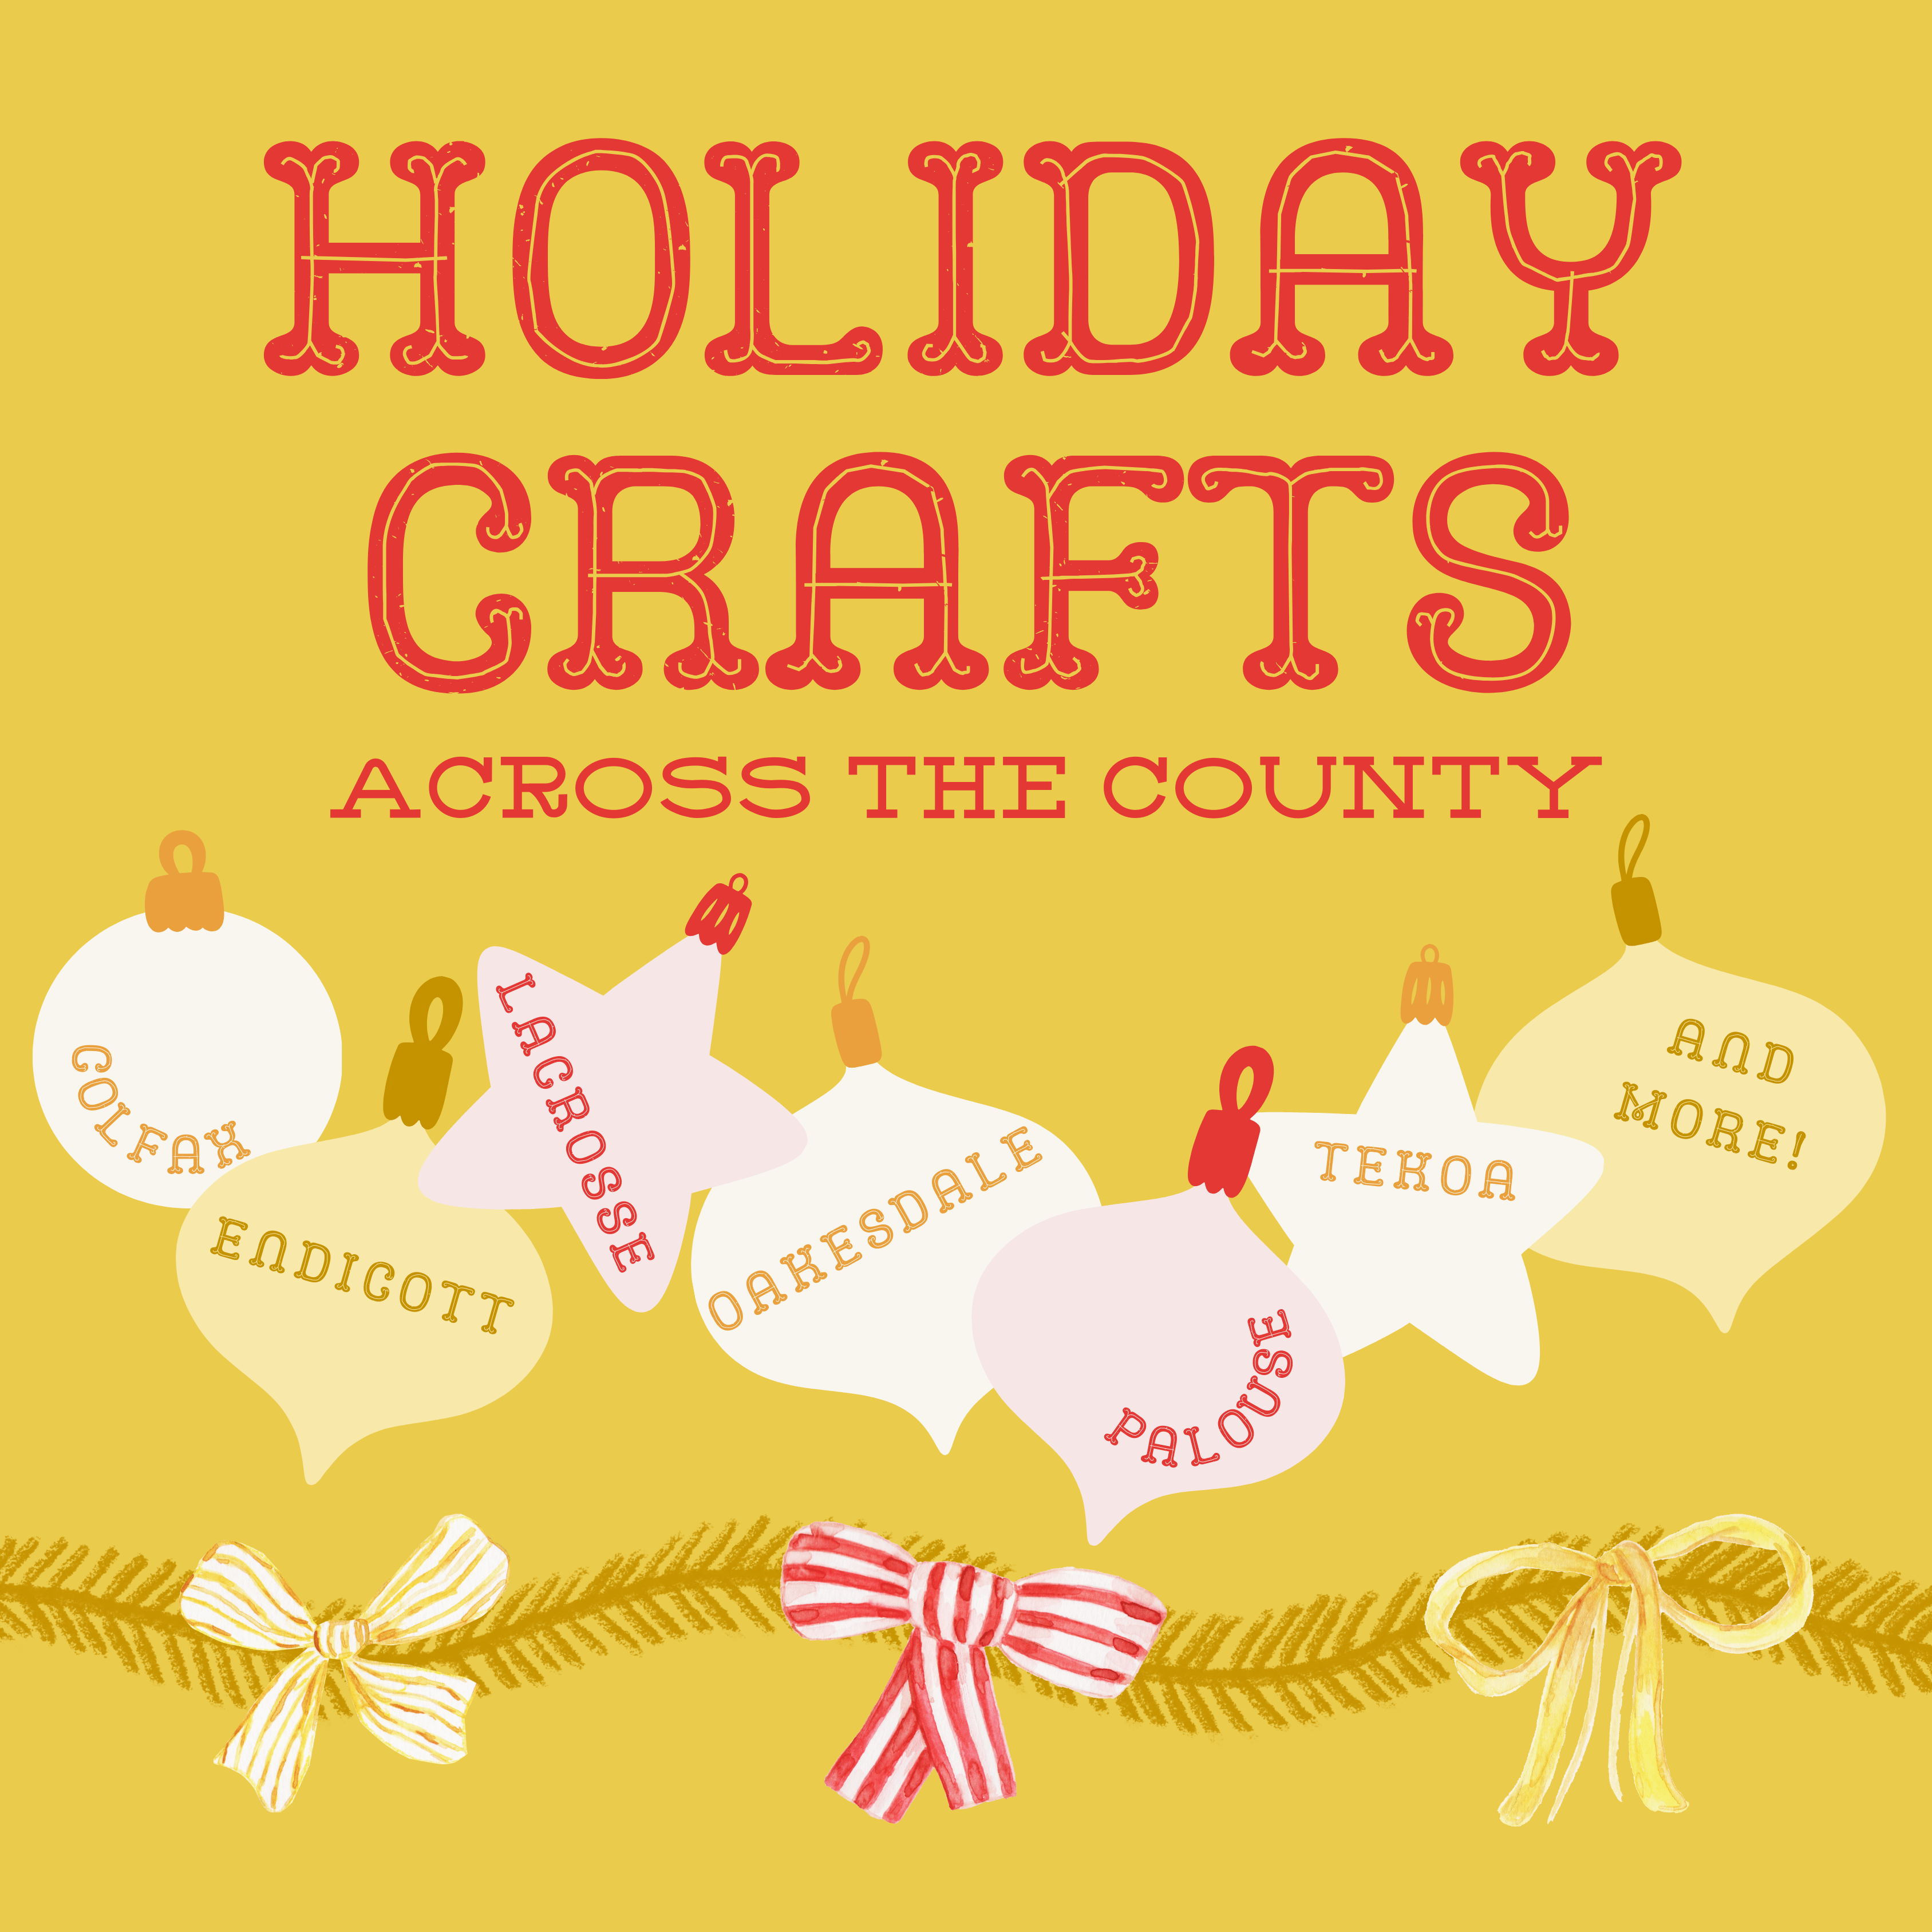 A golden background with red font reads: Holiday Crafts Across the County! Colfax, Endicott, LaCrosse, Oakesdale, Palouse, Tekoa, and More! Ornaments and ribbons decorate the graphic.